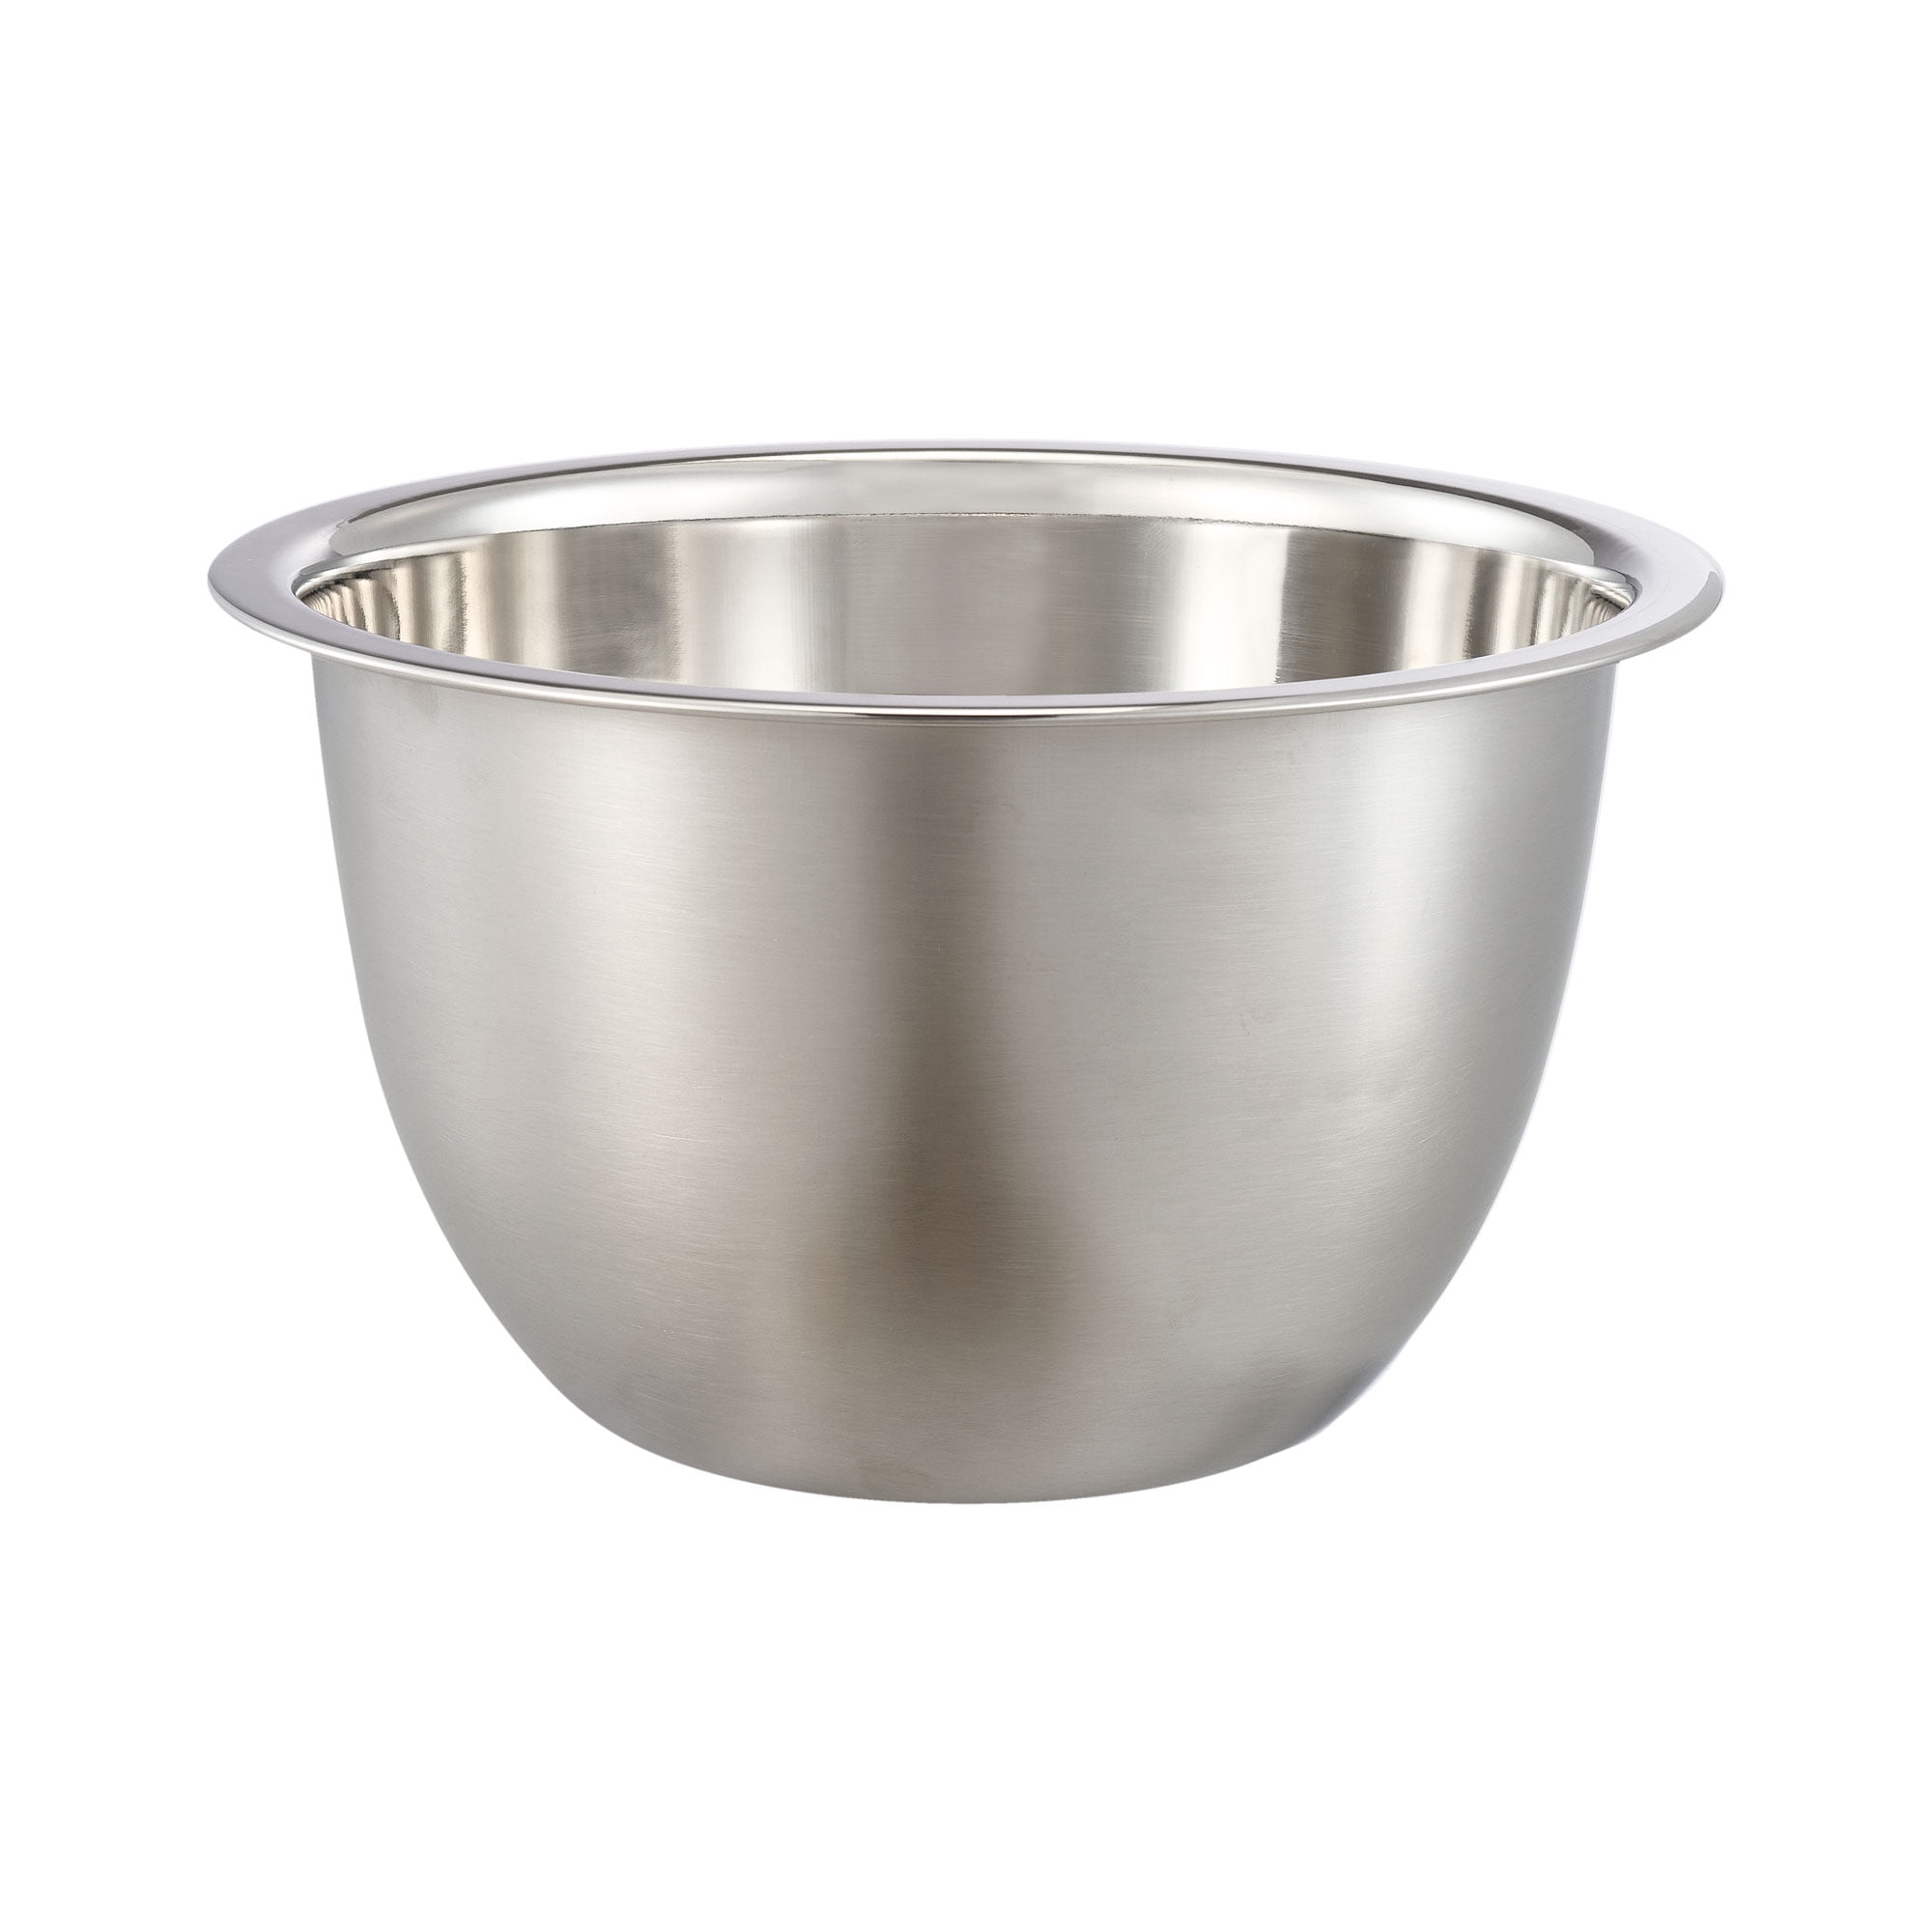 11 Best Mixing Bowls for Baking in 2018 - Glass and Stainless Steel Mixing  Bowls